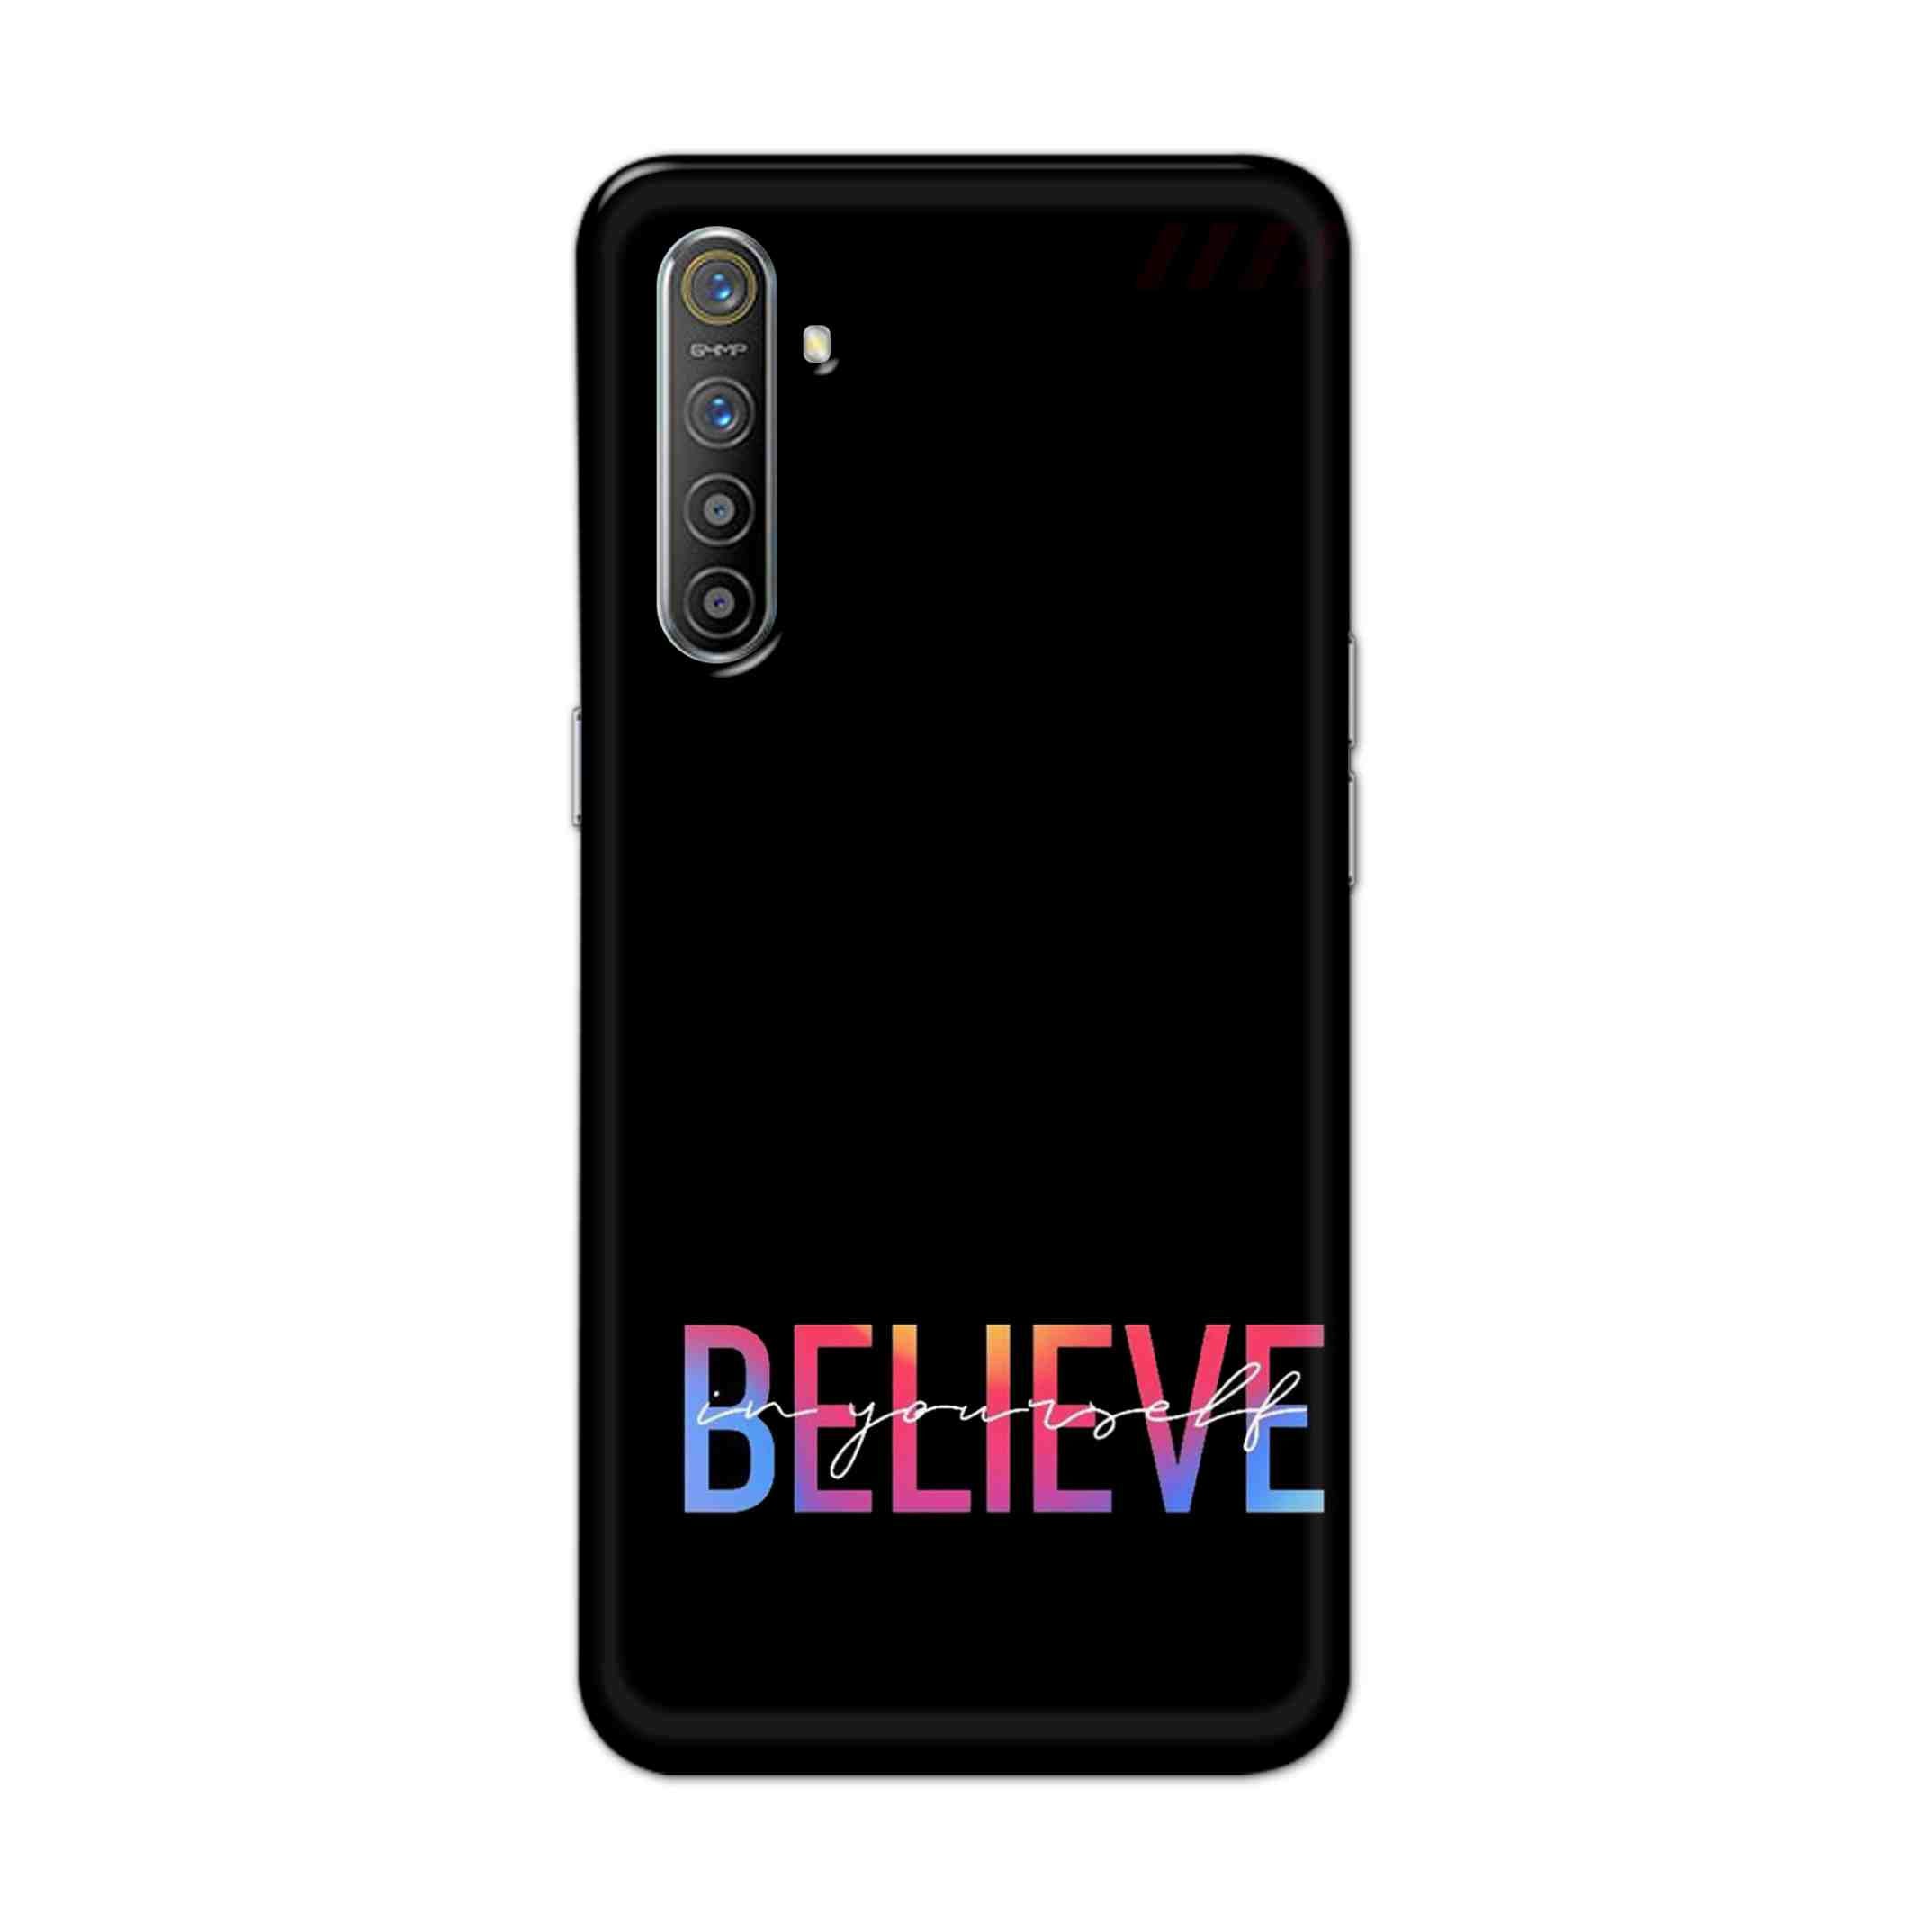 Buy Believe Hard Back Mobile Phone Case Cover For Oppo Realme XT Online